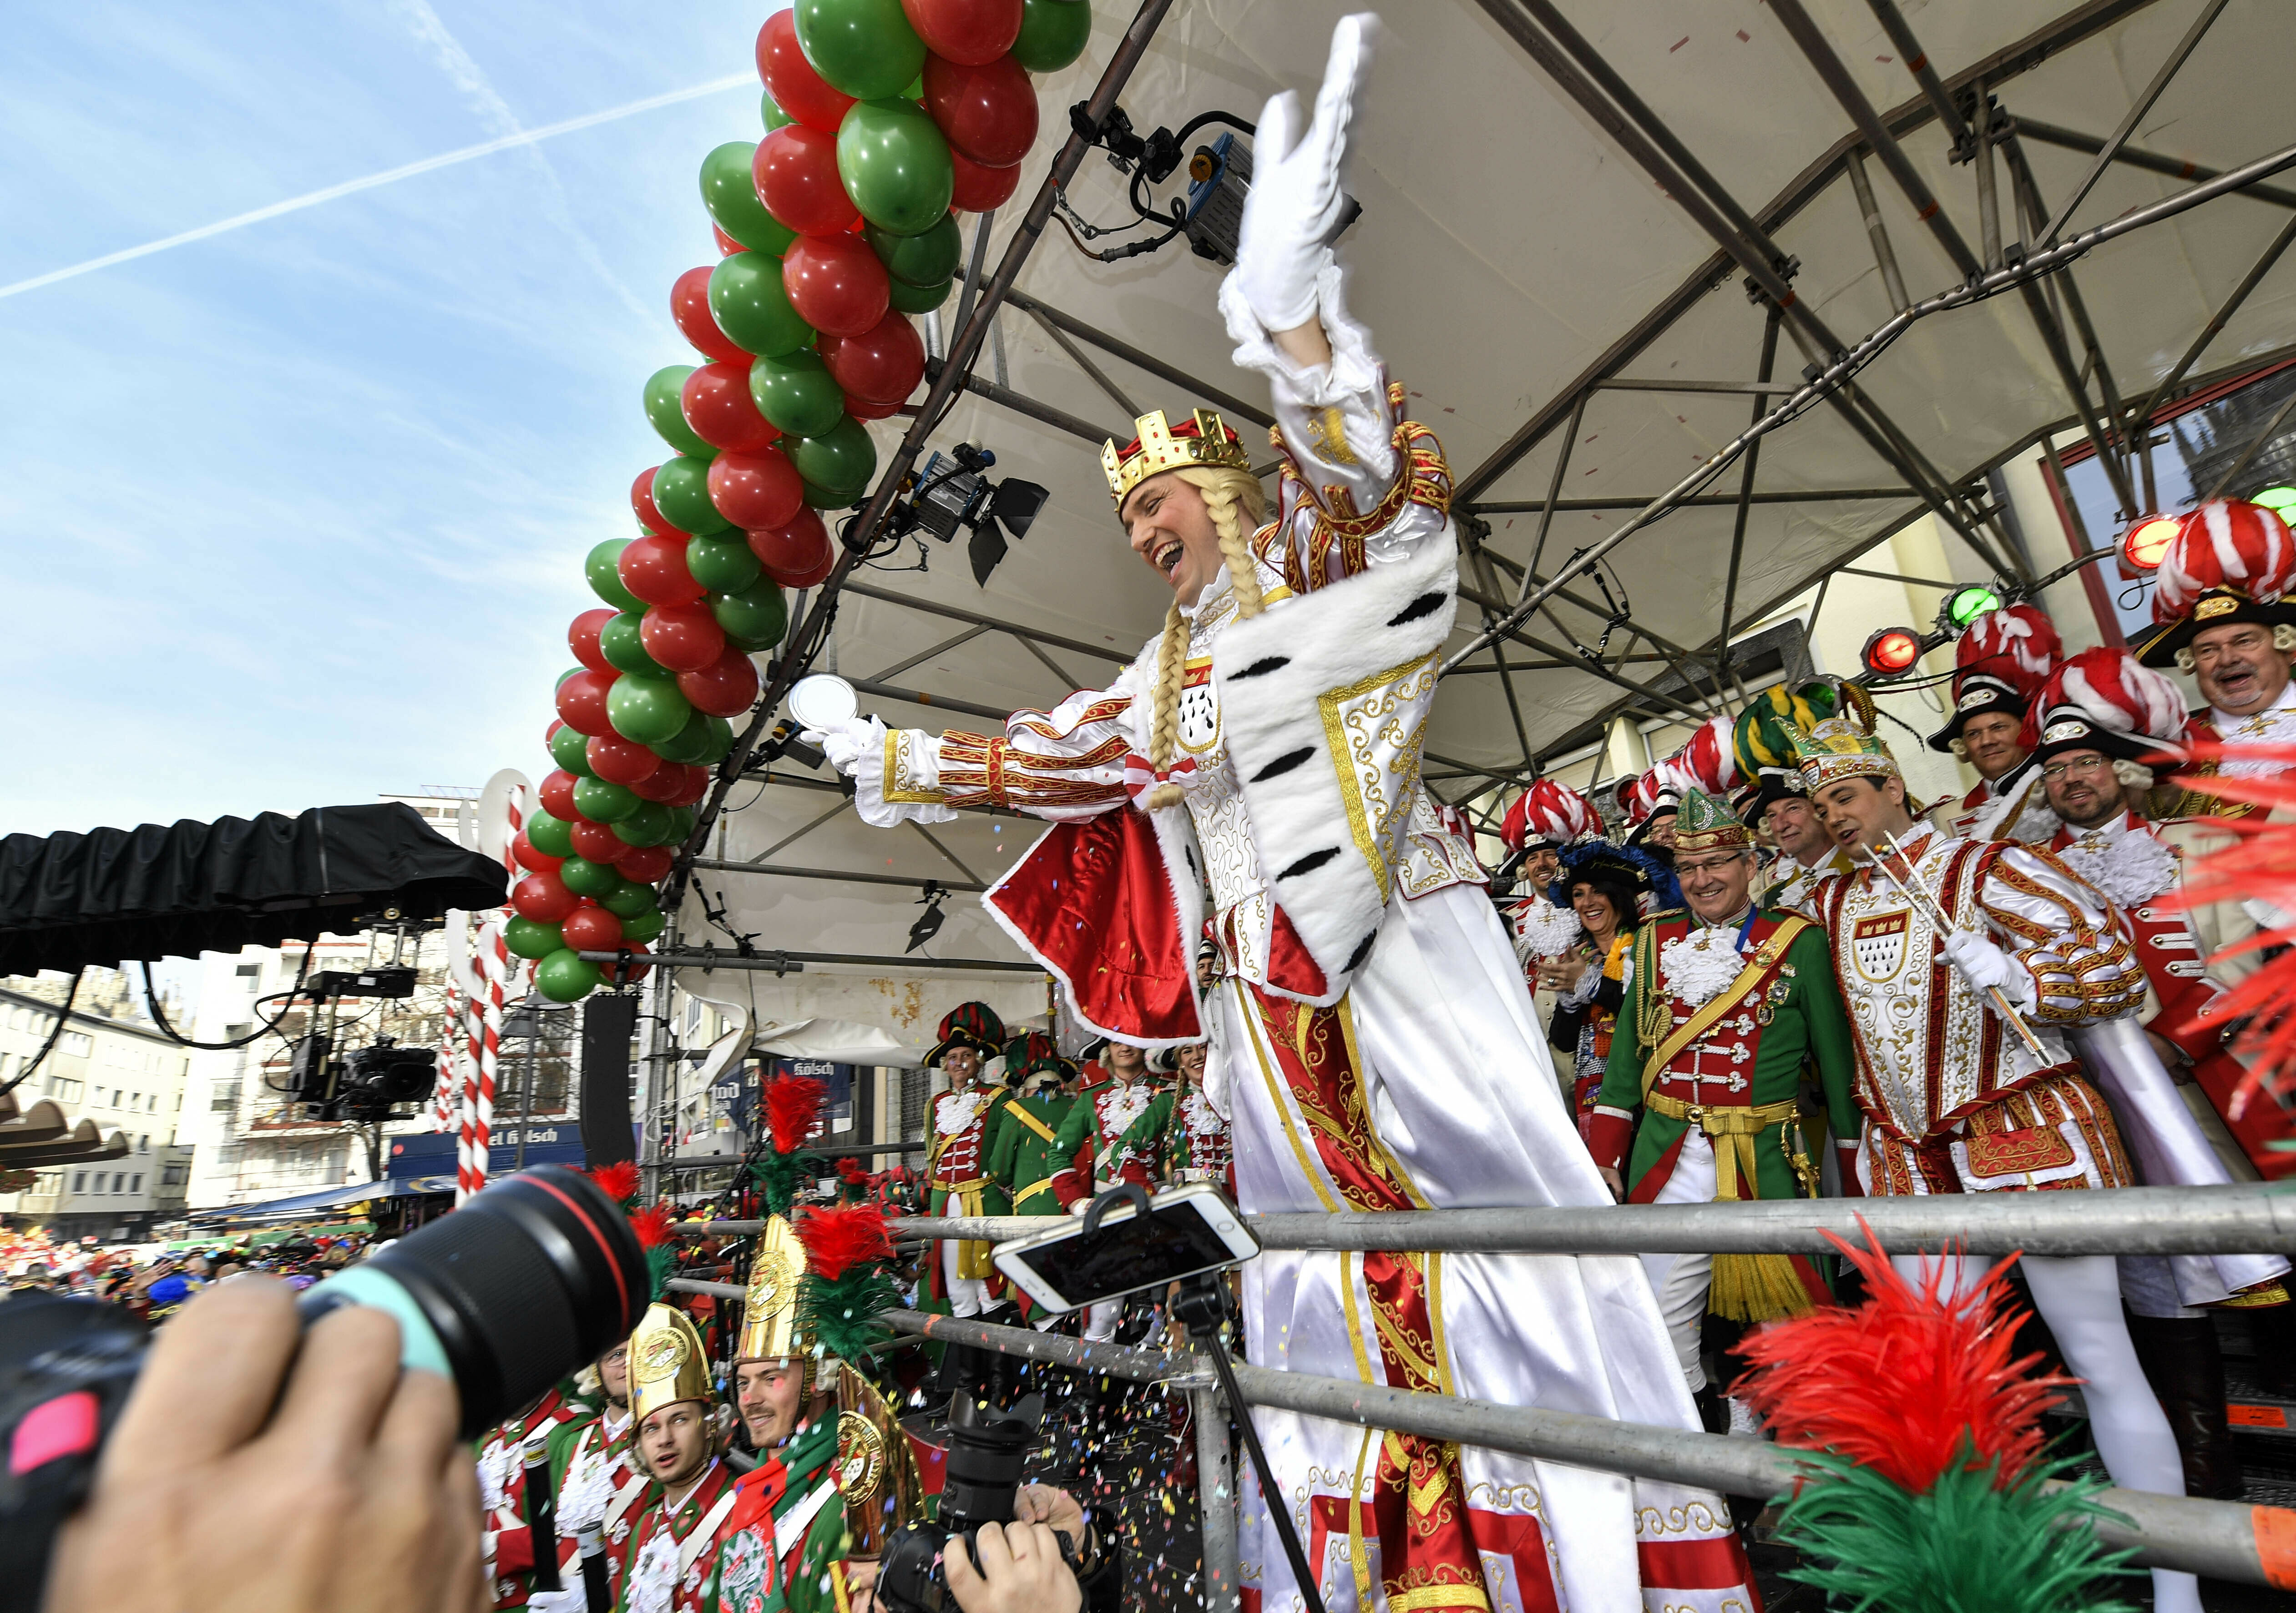 The traditional carnival virgin waves from a podium when thousands of revelers dressed in carnival costumes celebrate the start of the street carnival in Cologne, Germany, Thursday, Feb. 28, 2019. (AP Photo/Martin Meissner)